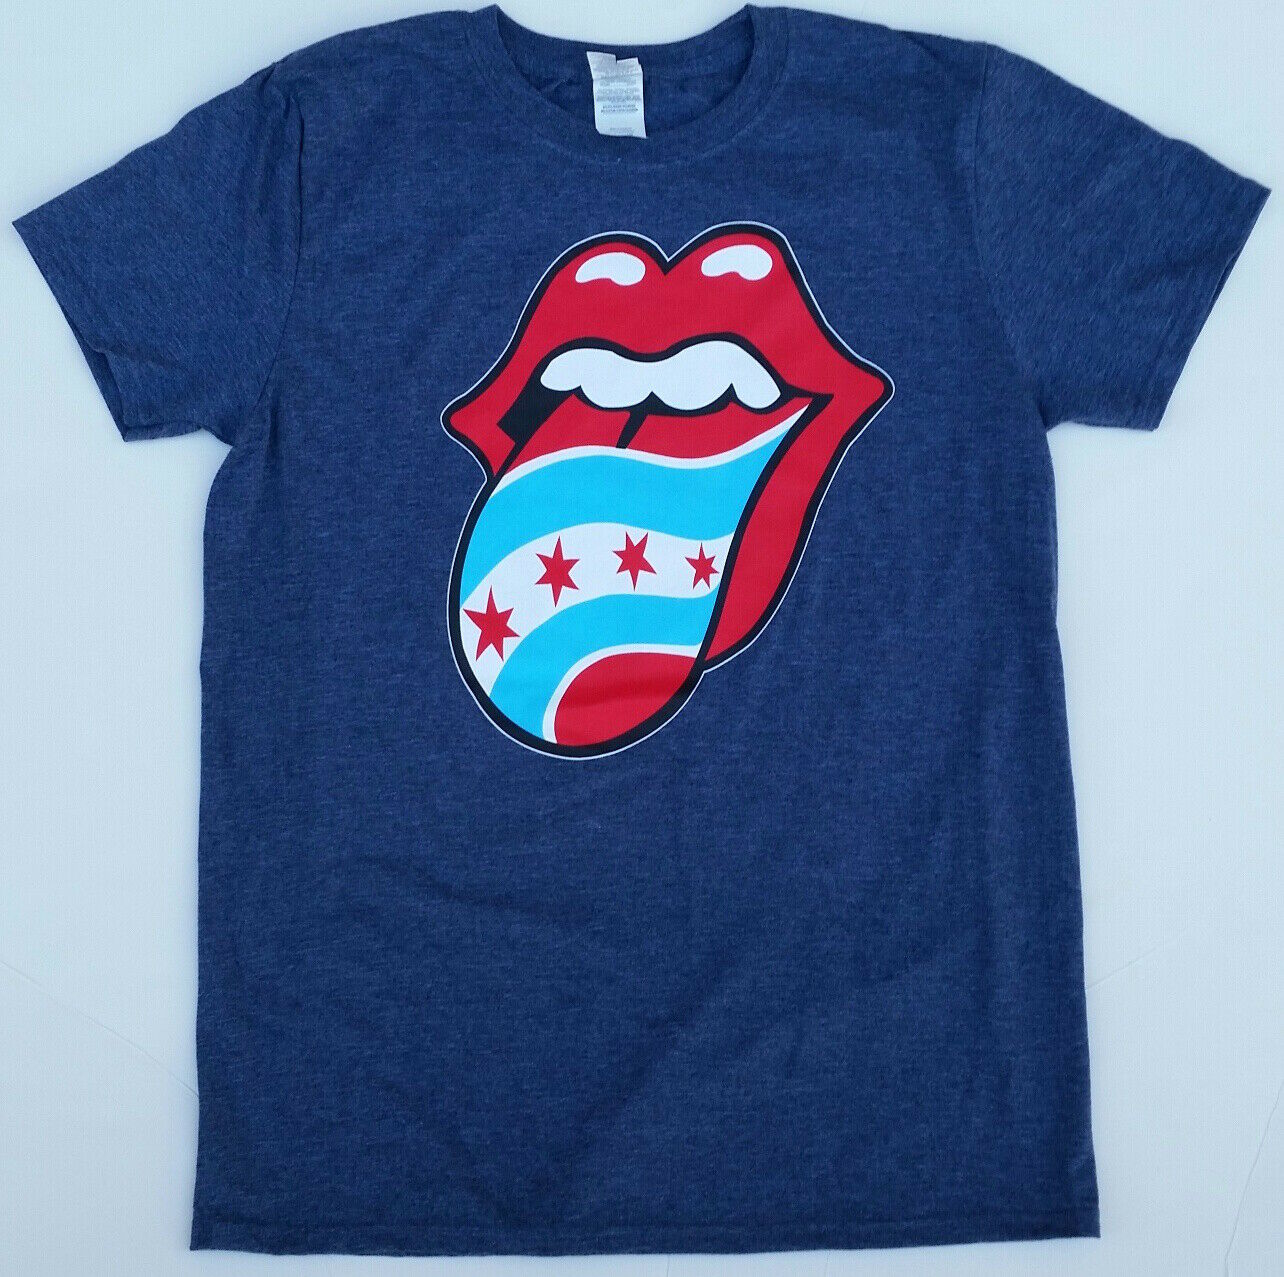 New Rolling Stones Soldier Field Chicago Flag Concert L T-shirt 2019 Tickets